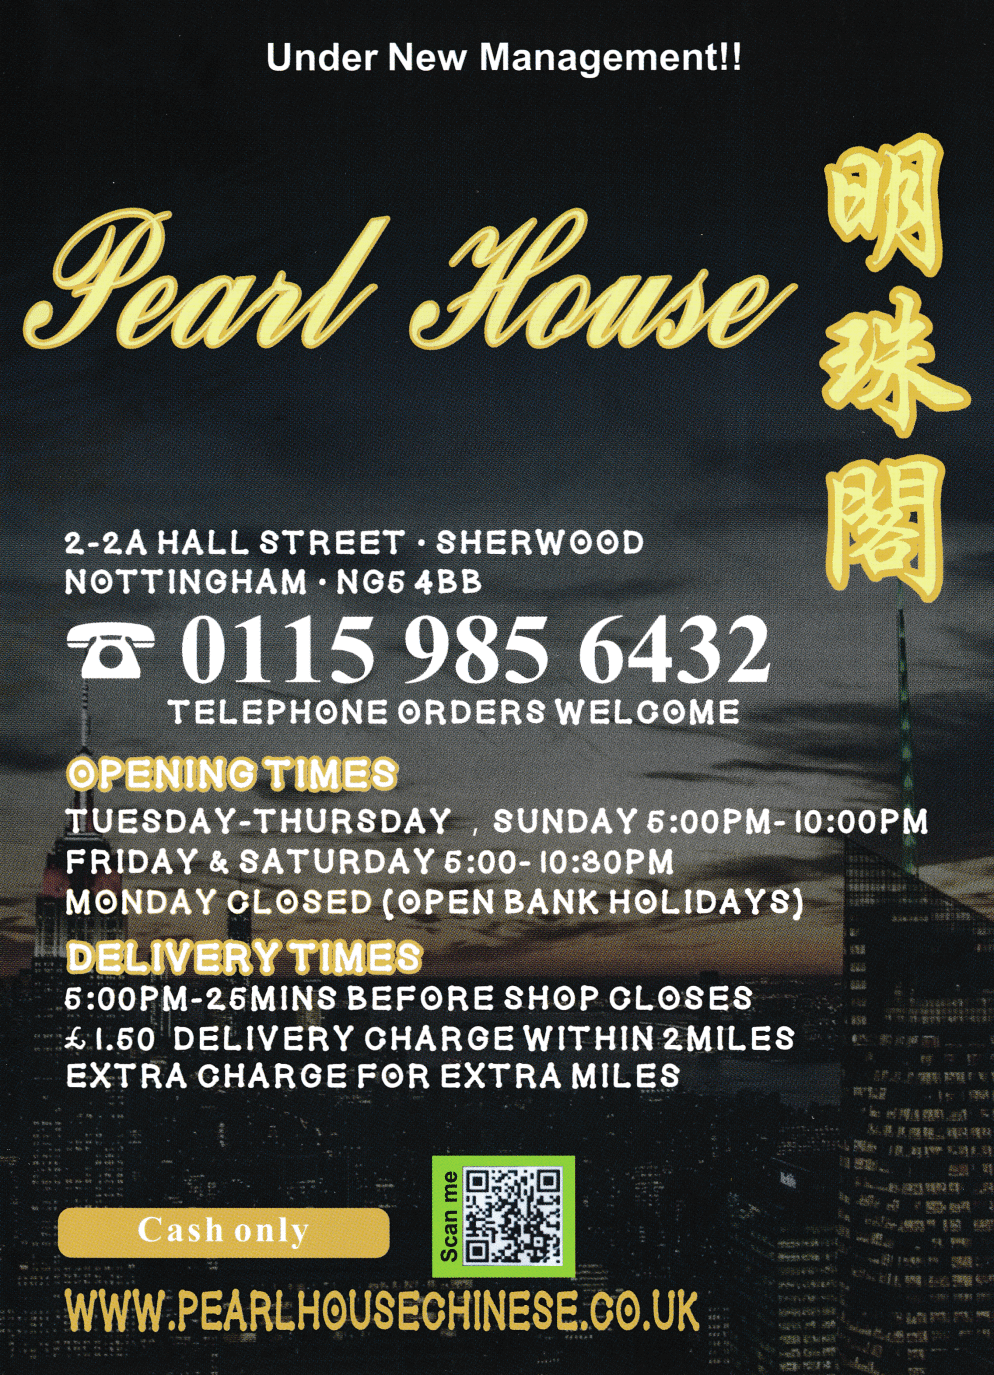 Menu for Pearl House Chinese takeaway on Hall Street in Sherwood Nottingham NG5 4BB